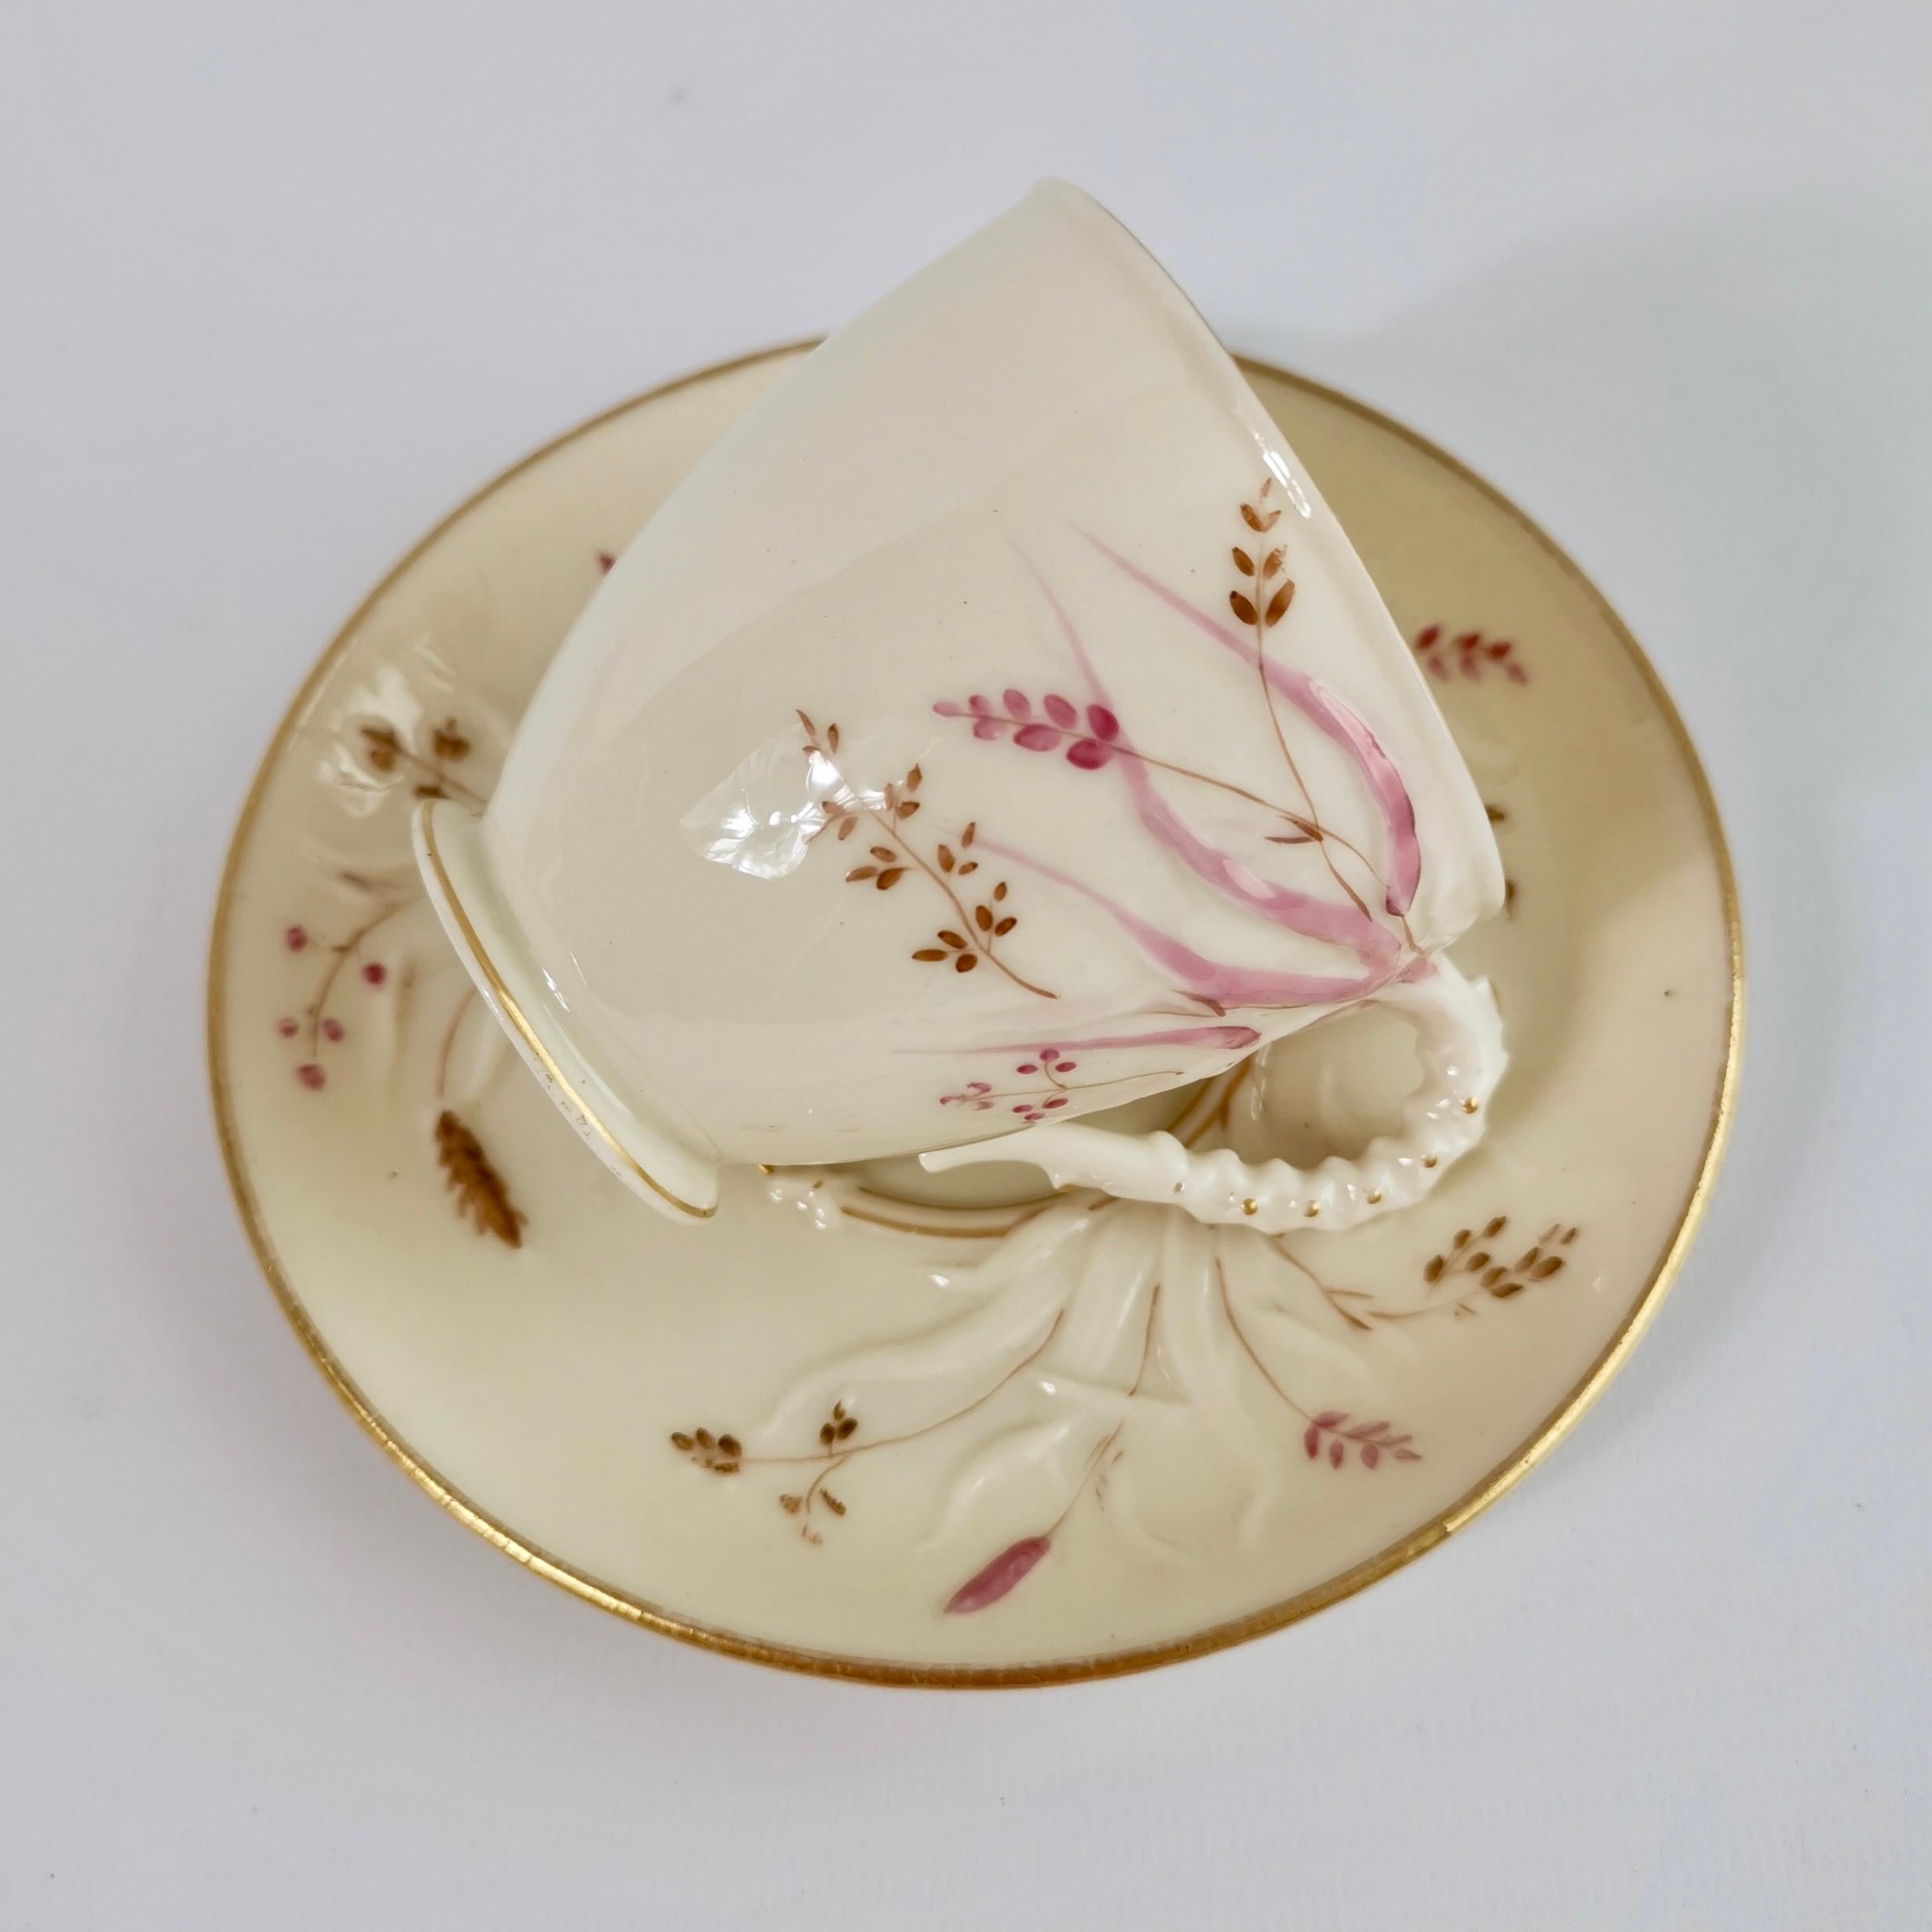 This is a beautiful teacup and saucer in the Grass design. Both items carry the 1st Black Mark, which was used between 1863 and 1891. This teacup has a very narrow shape, as was fashionable in the late Victorian time, and would be perfect for coffee